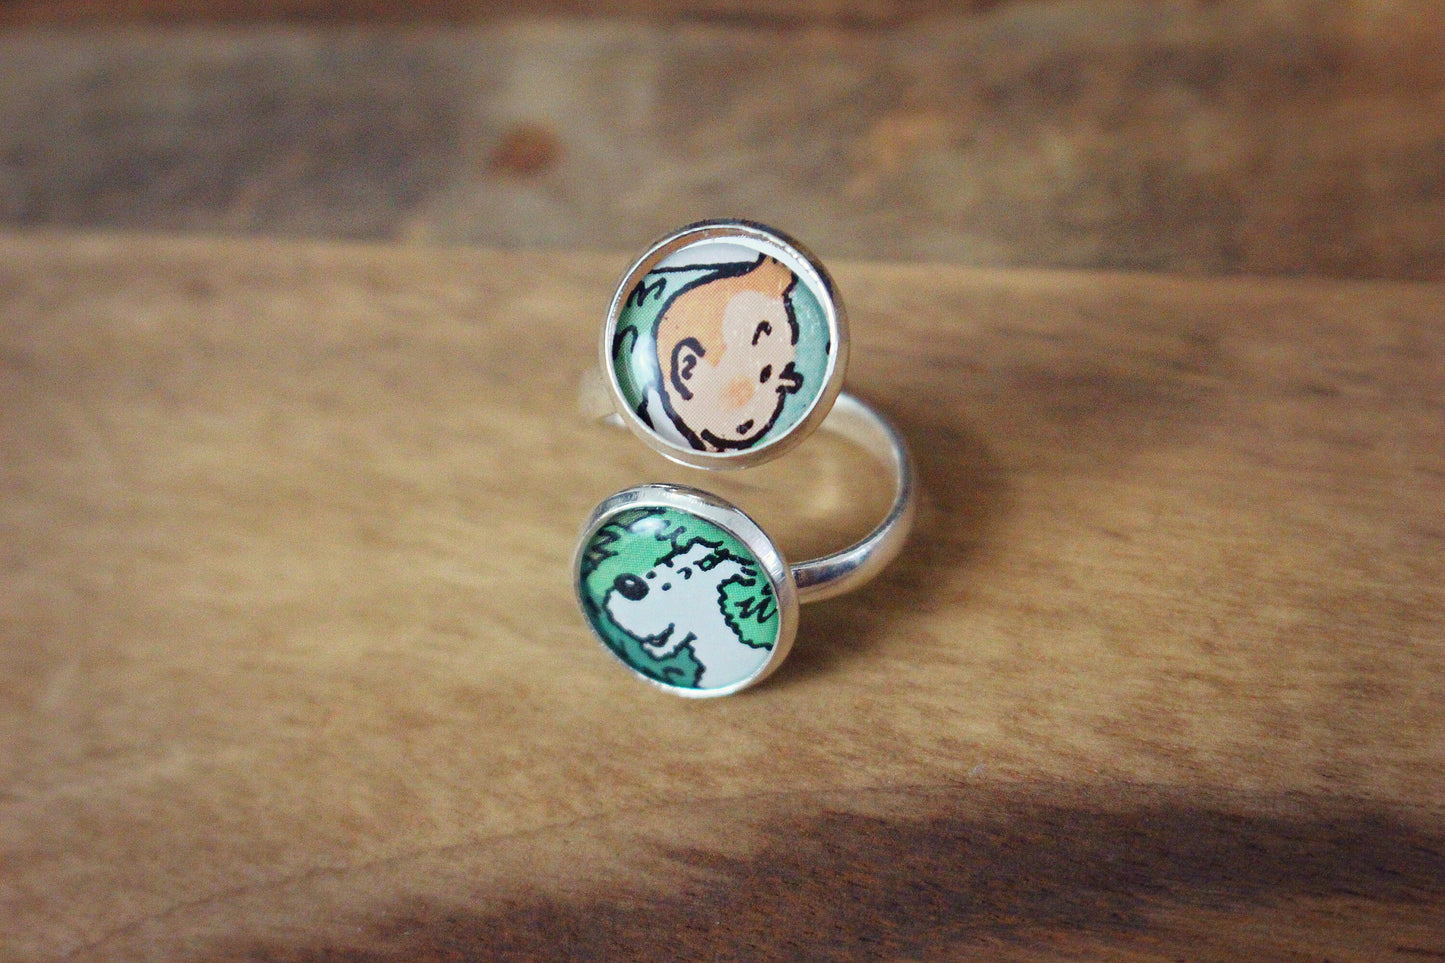 Vintage Comic Book Cartoon Ring Retro cartoon character jewellery Superhero gift Comic Strip Fun statement ring Upcycle recycled Sustainable